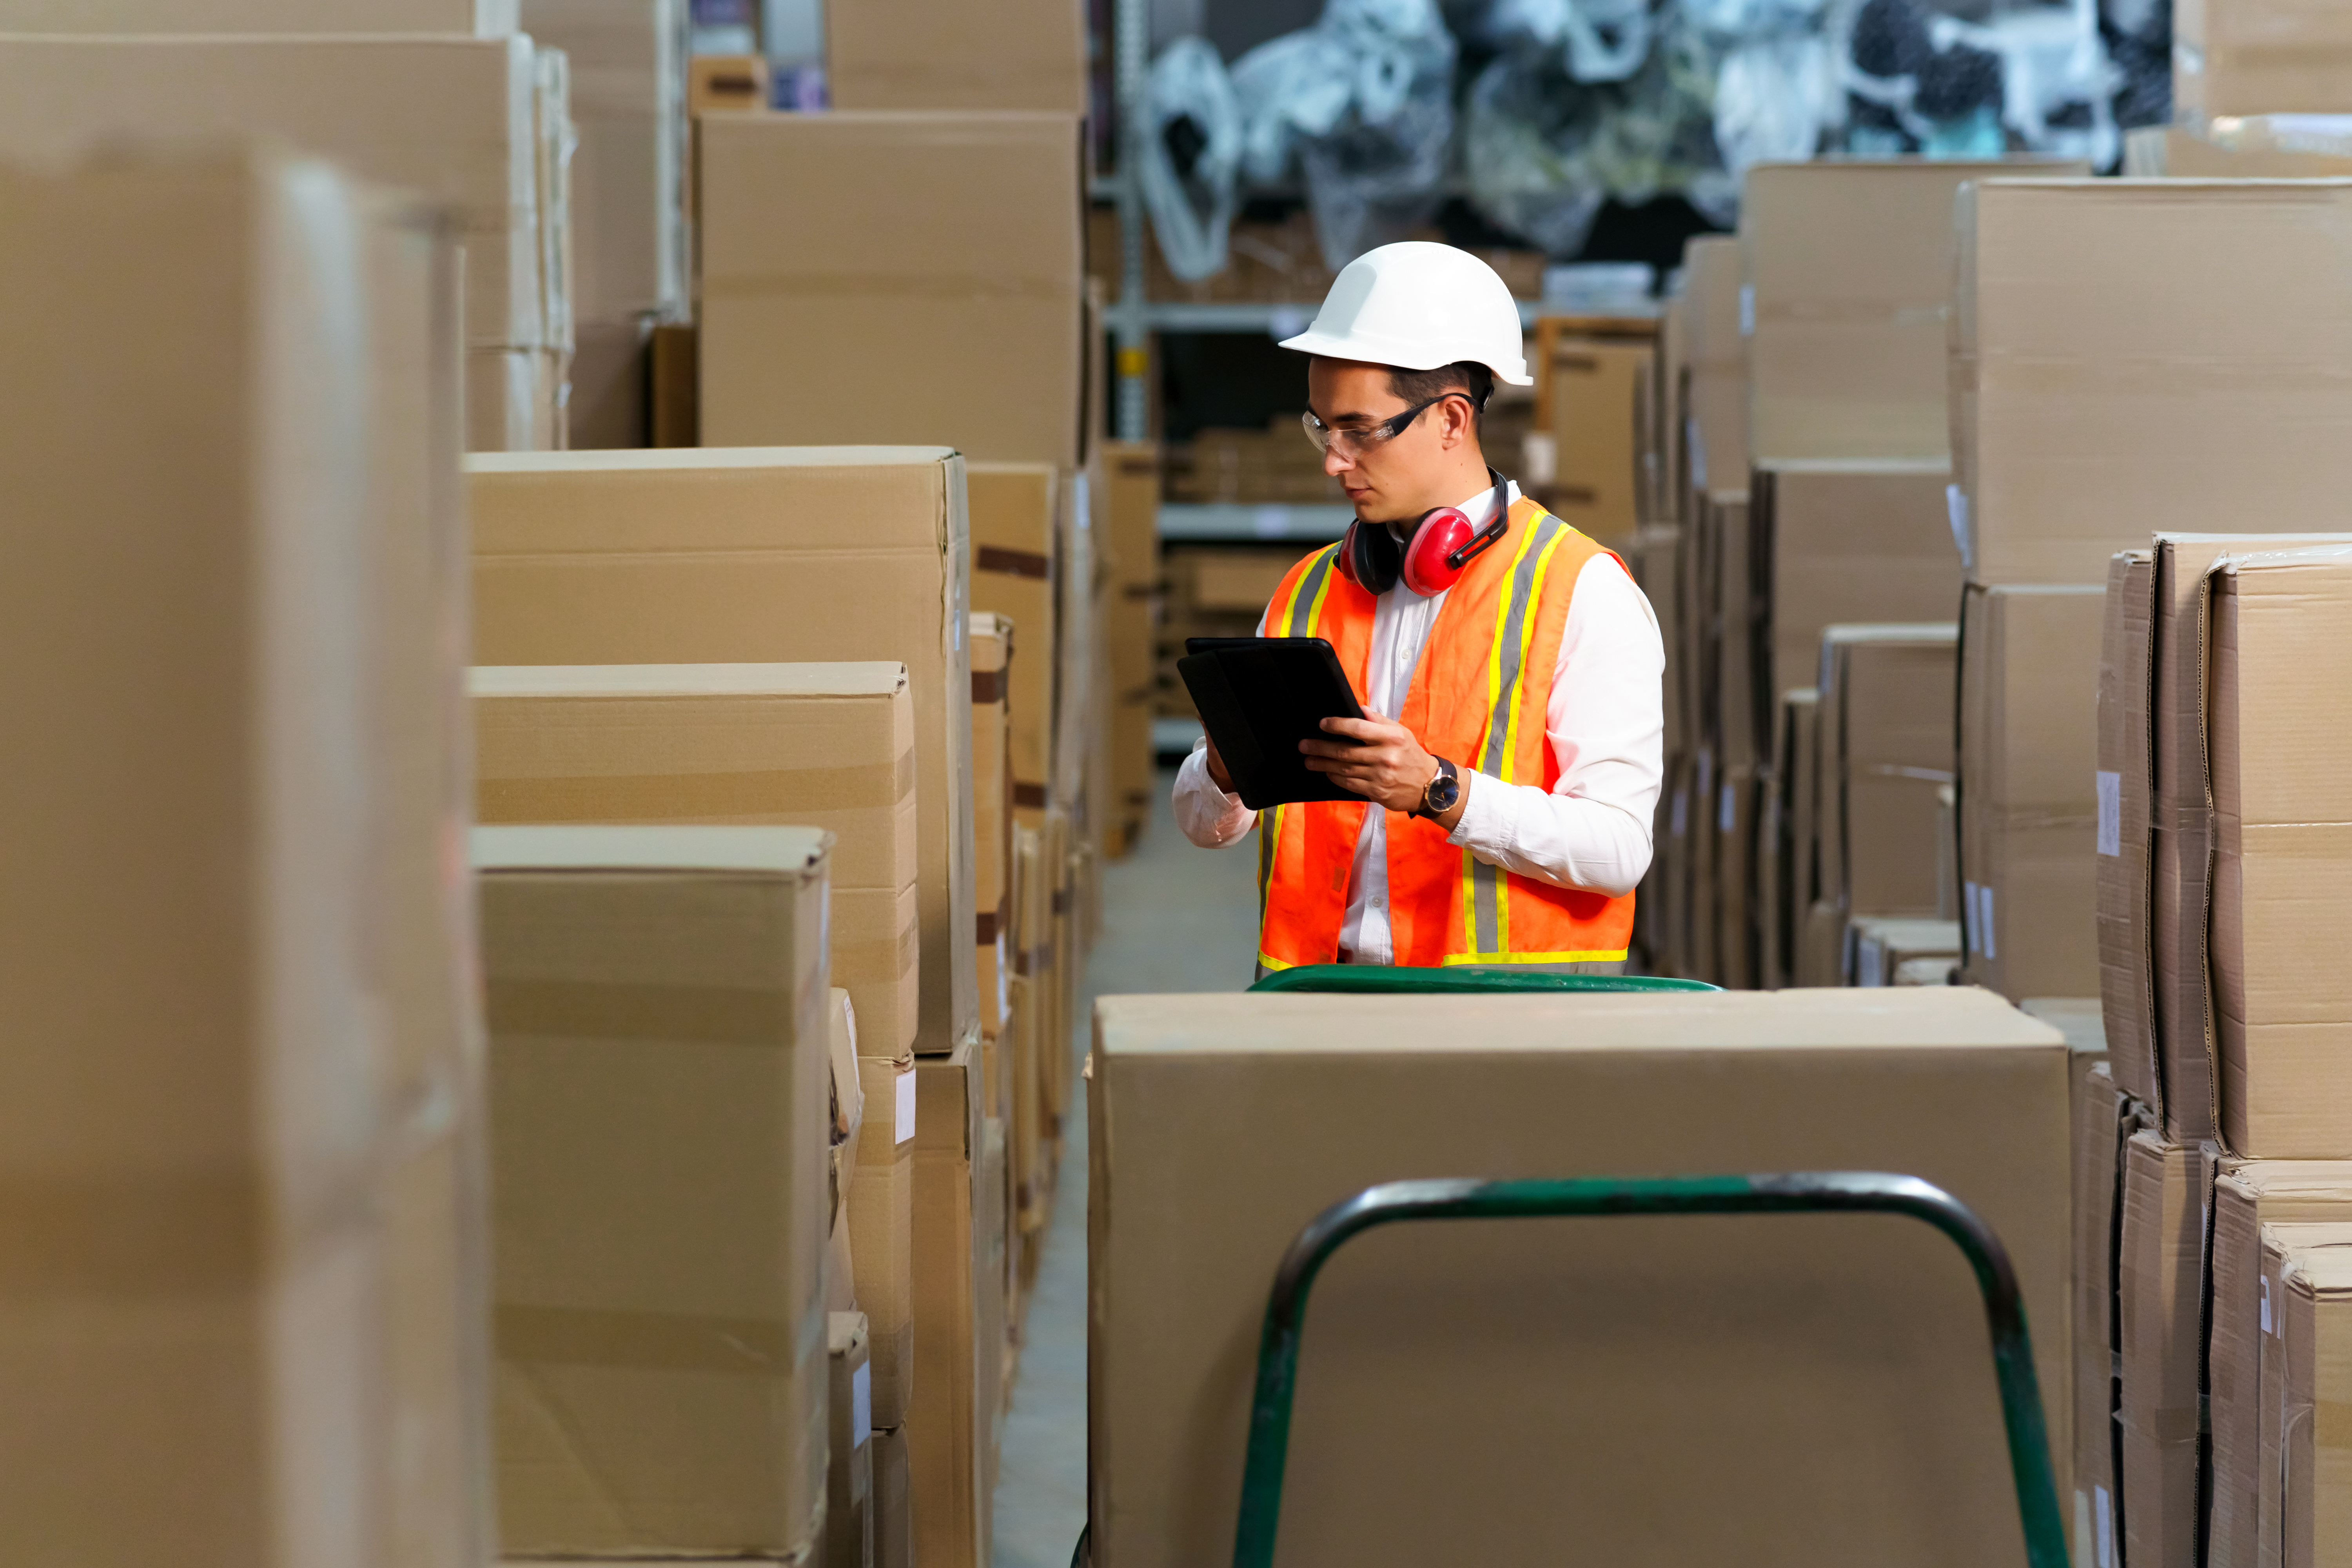 Employee of a logistics warehouse conducts an inventory of products